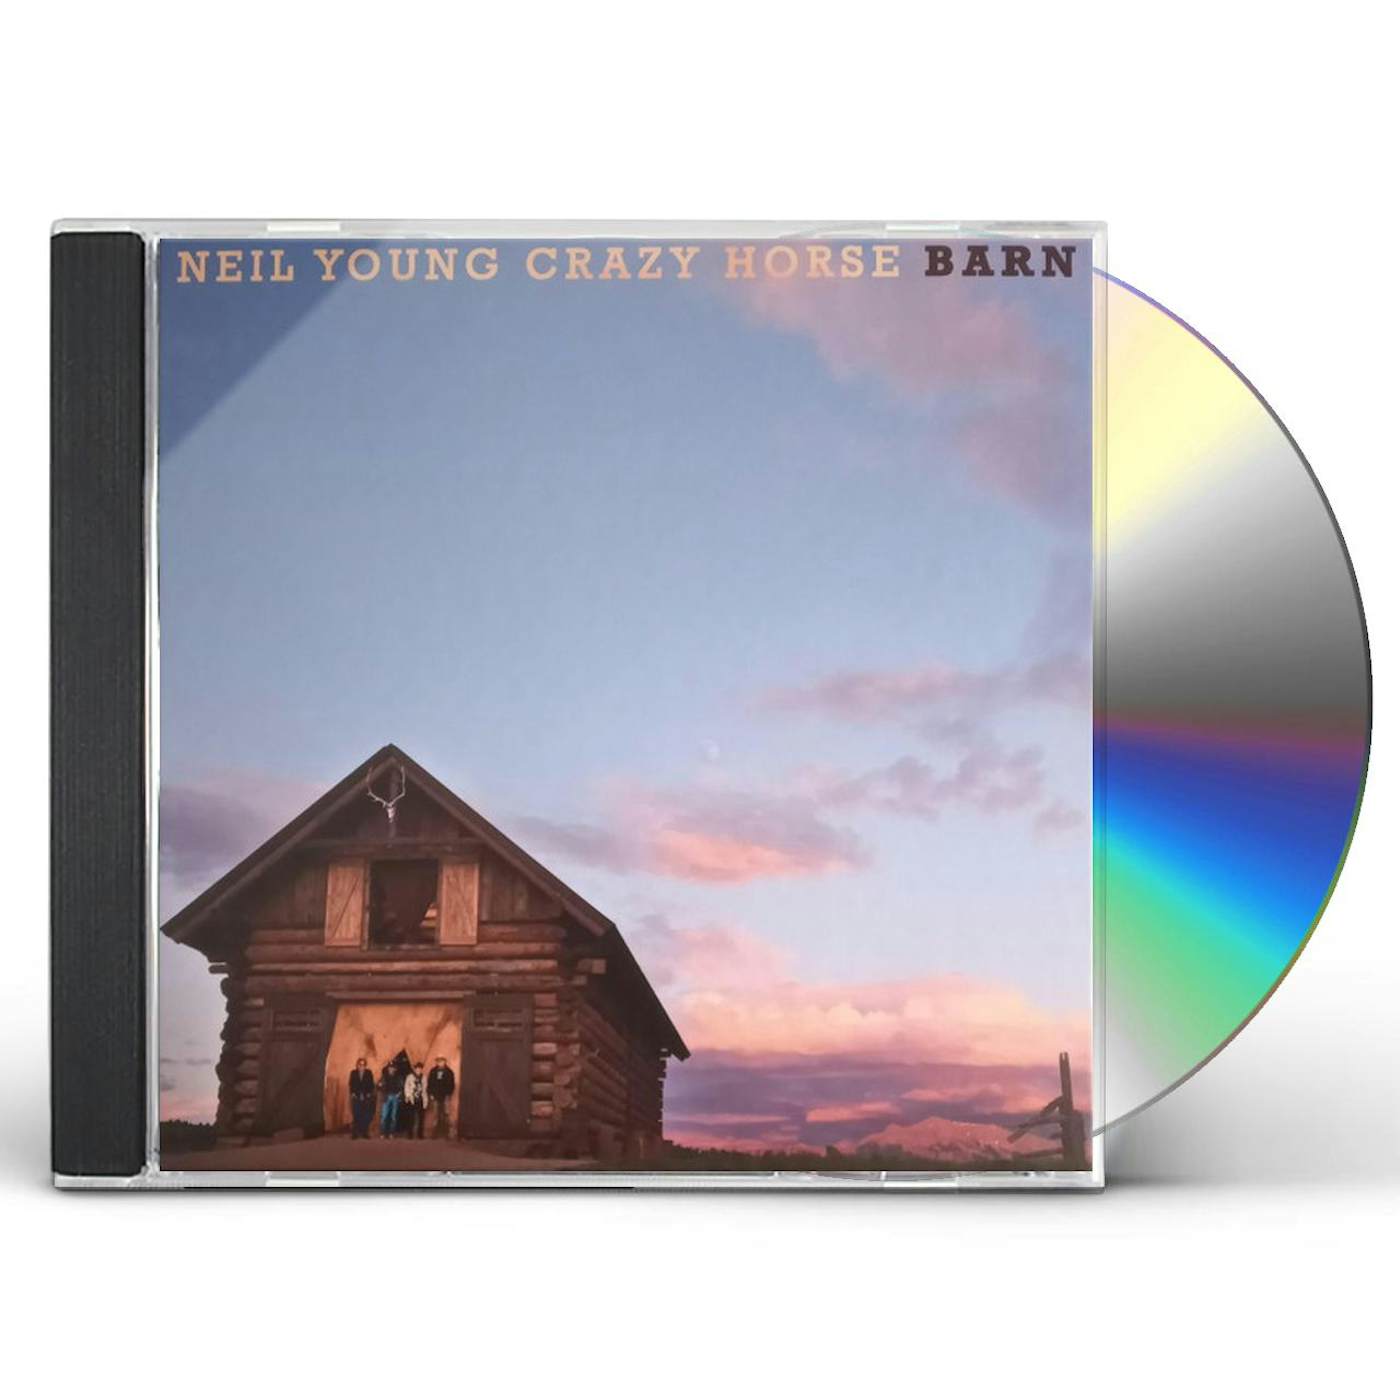 Neil Young & Crazy Horse BARN CD